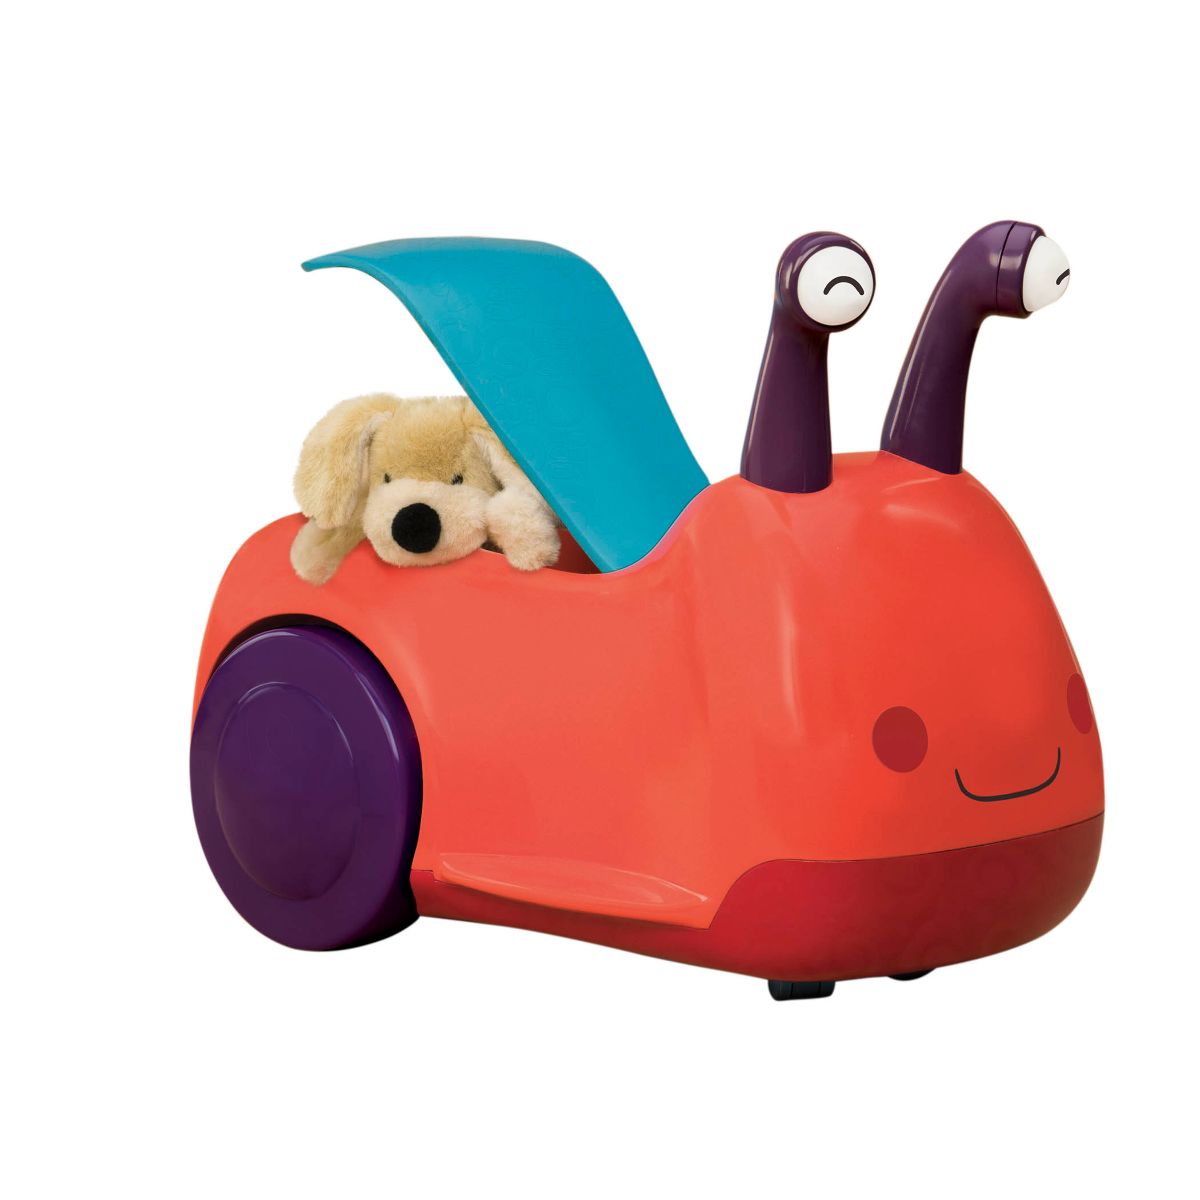 Snail ride-on with compartment